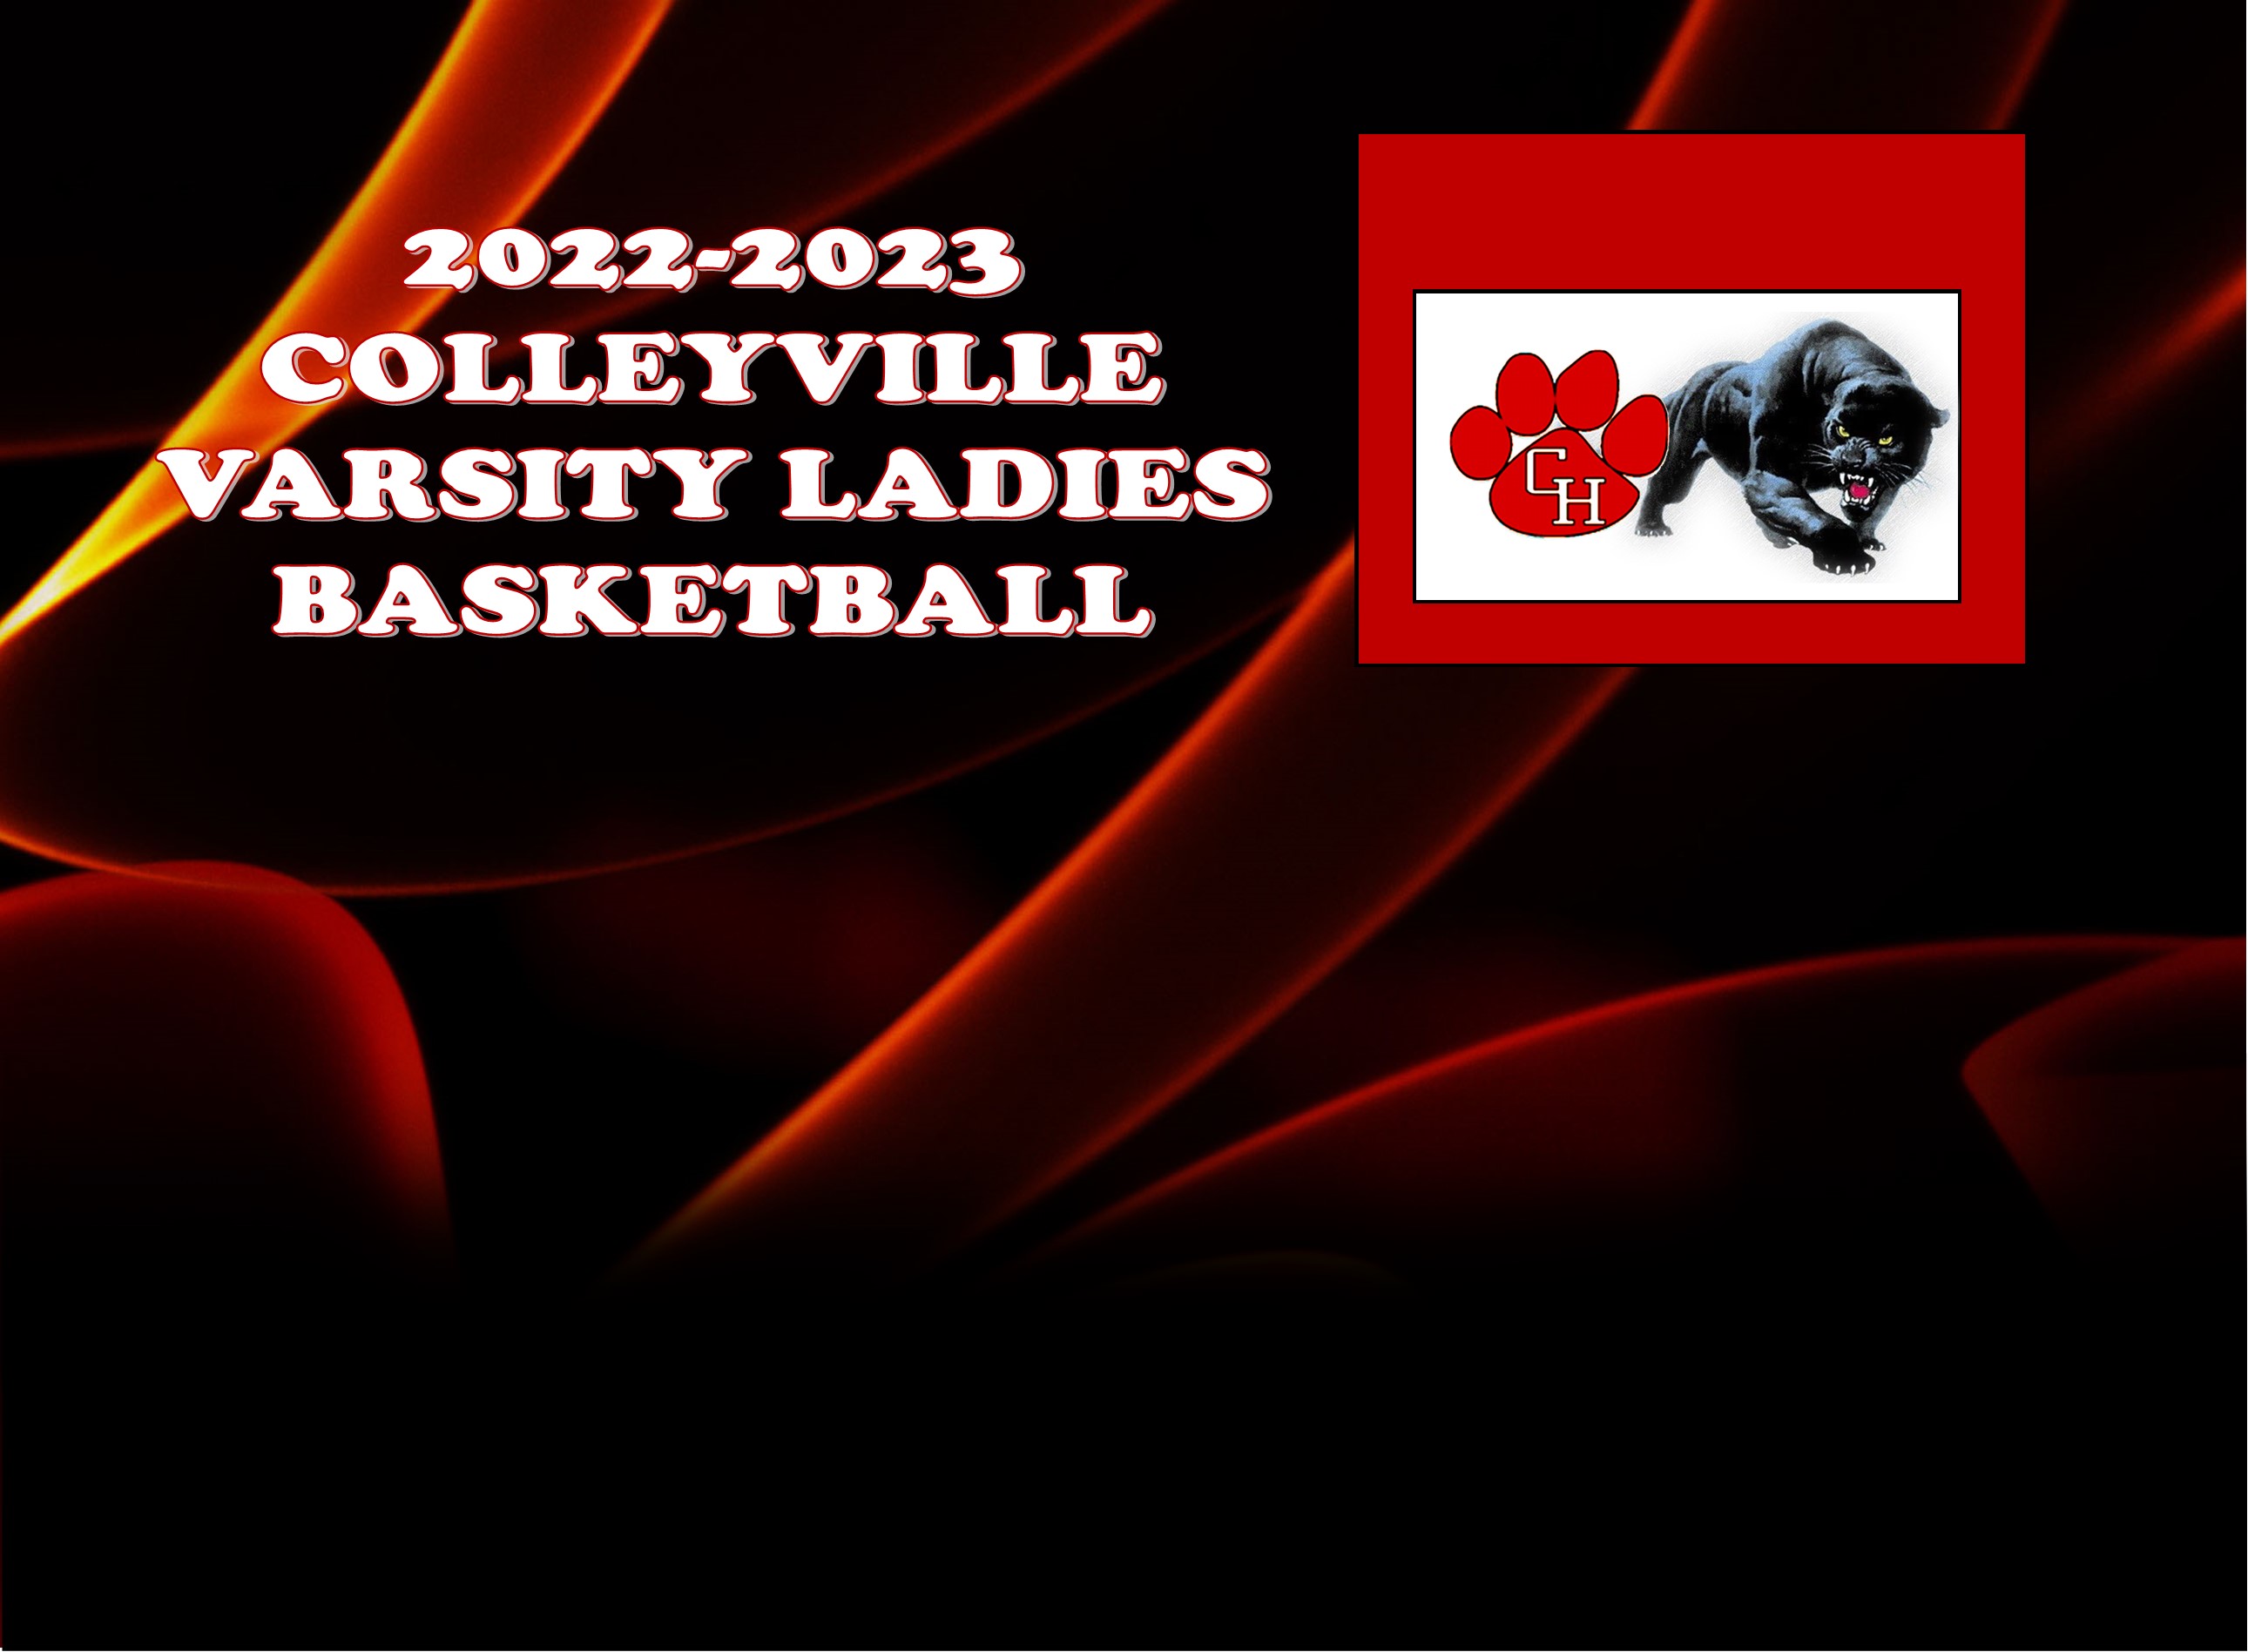 Colleyville Lady Panthers Playoff Area Champions With Victory Over Aledo Ladycats 62-45